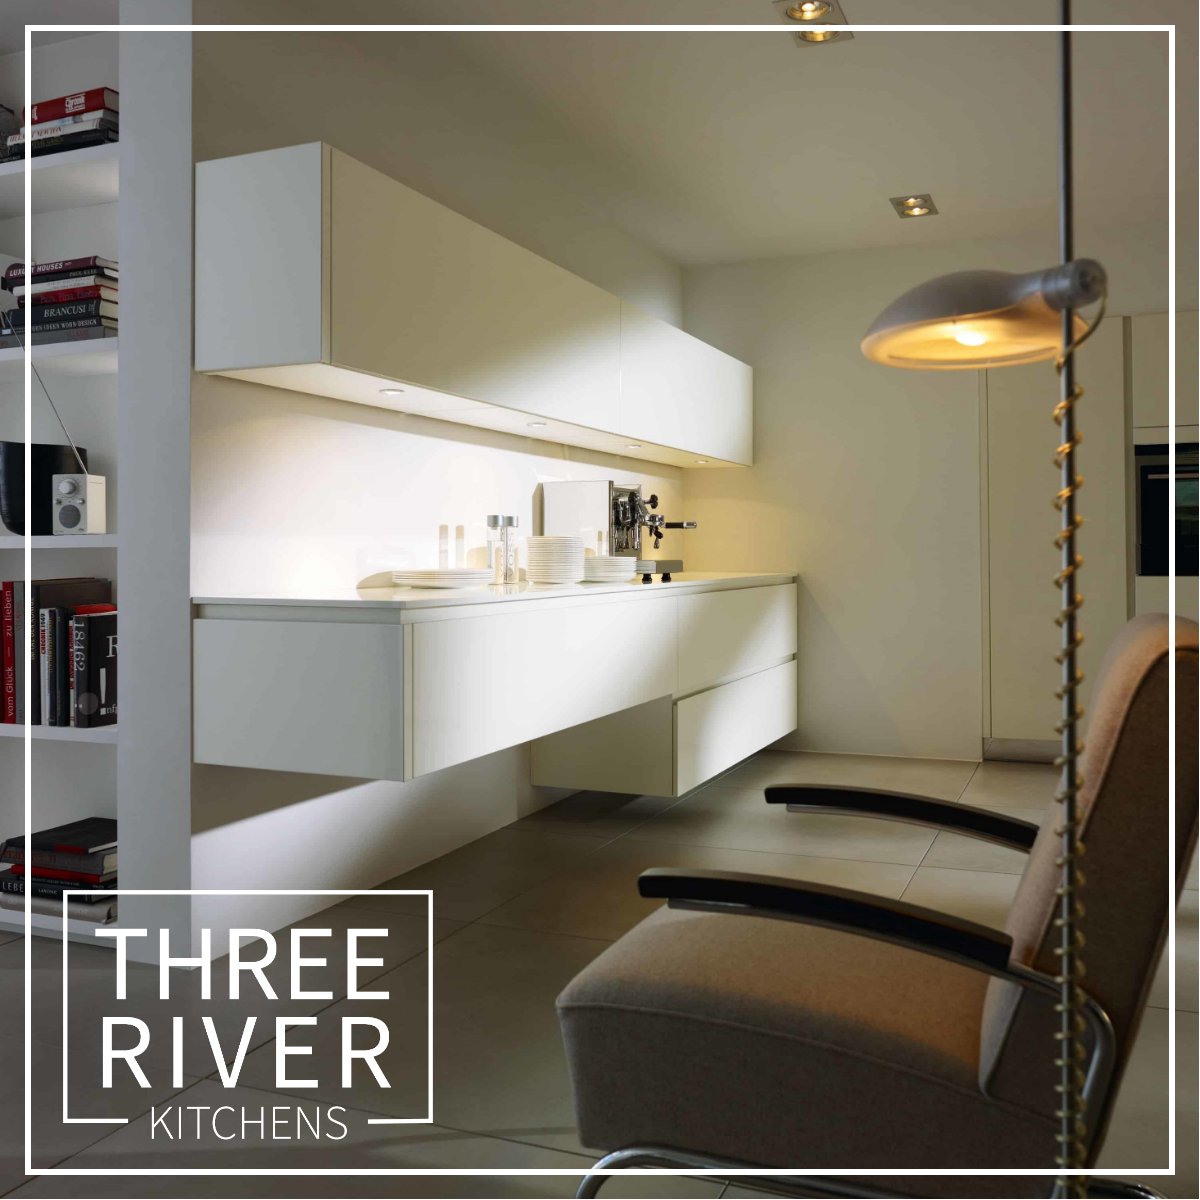 Transform your space with a handleless kitchen from Three River Kitchens. Book a consultation for contemporary sophistication. #kitchendesign #kitchenideas #kitchendesignideas #kitchendesigner #kitchendesigntrends #essexbusiness #essexkitchens #chelmsfordbusiness